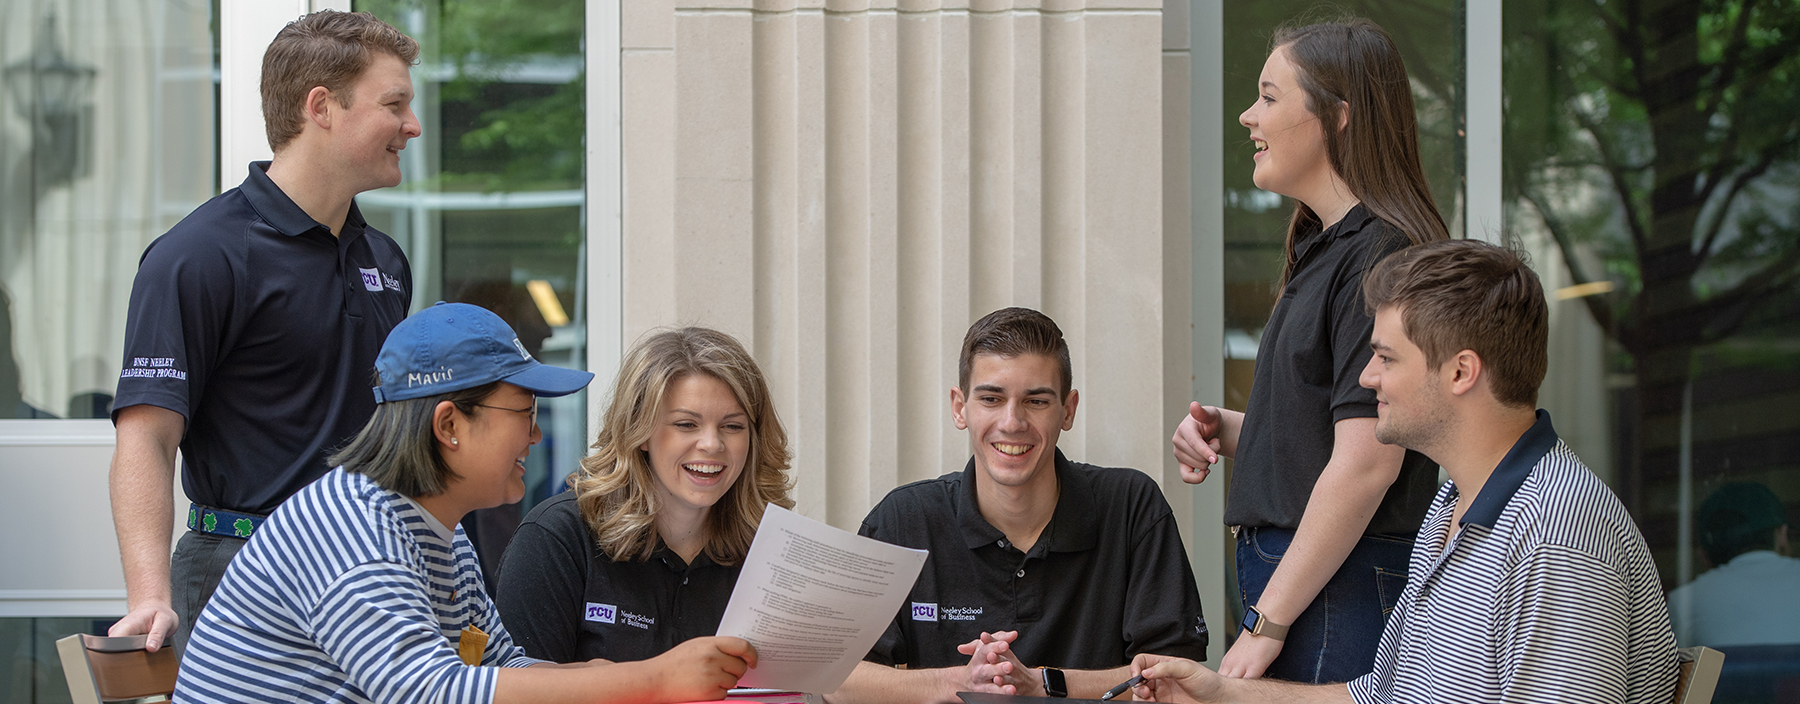 Section Image: Students gathered around a table outside, smiling and looking at papers. 